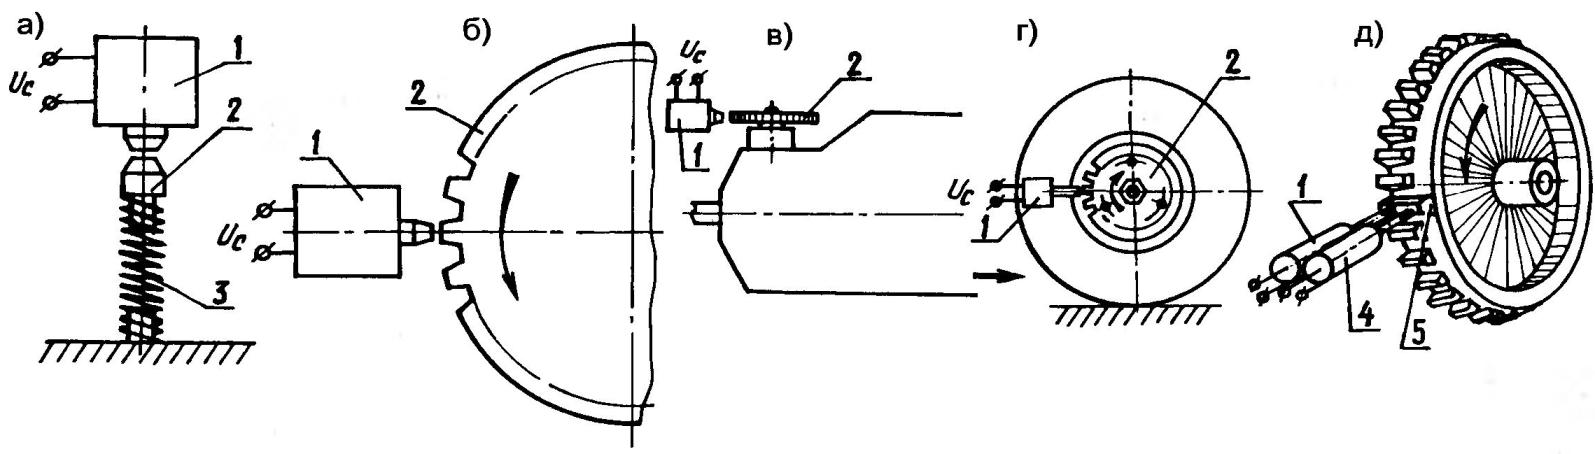 Fig. 2. Schemes of work in cars induction sensor swing or strike (a), rotometer/tachometer (b), speedometer (b) odometer (d) and the ignition system with digital control PULSE TECHNIQUES of Dr. Artiga (d)